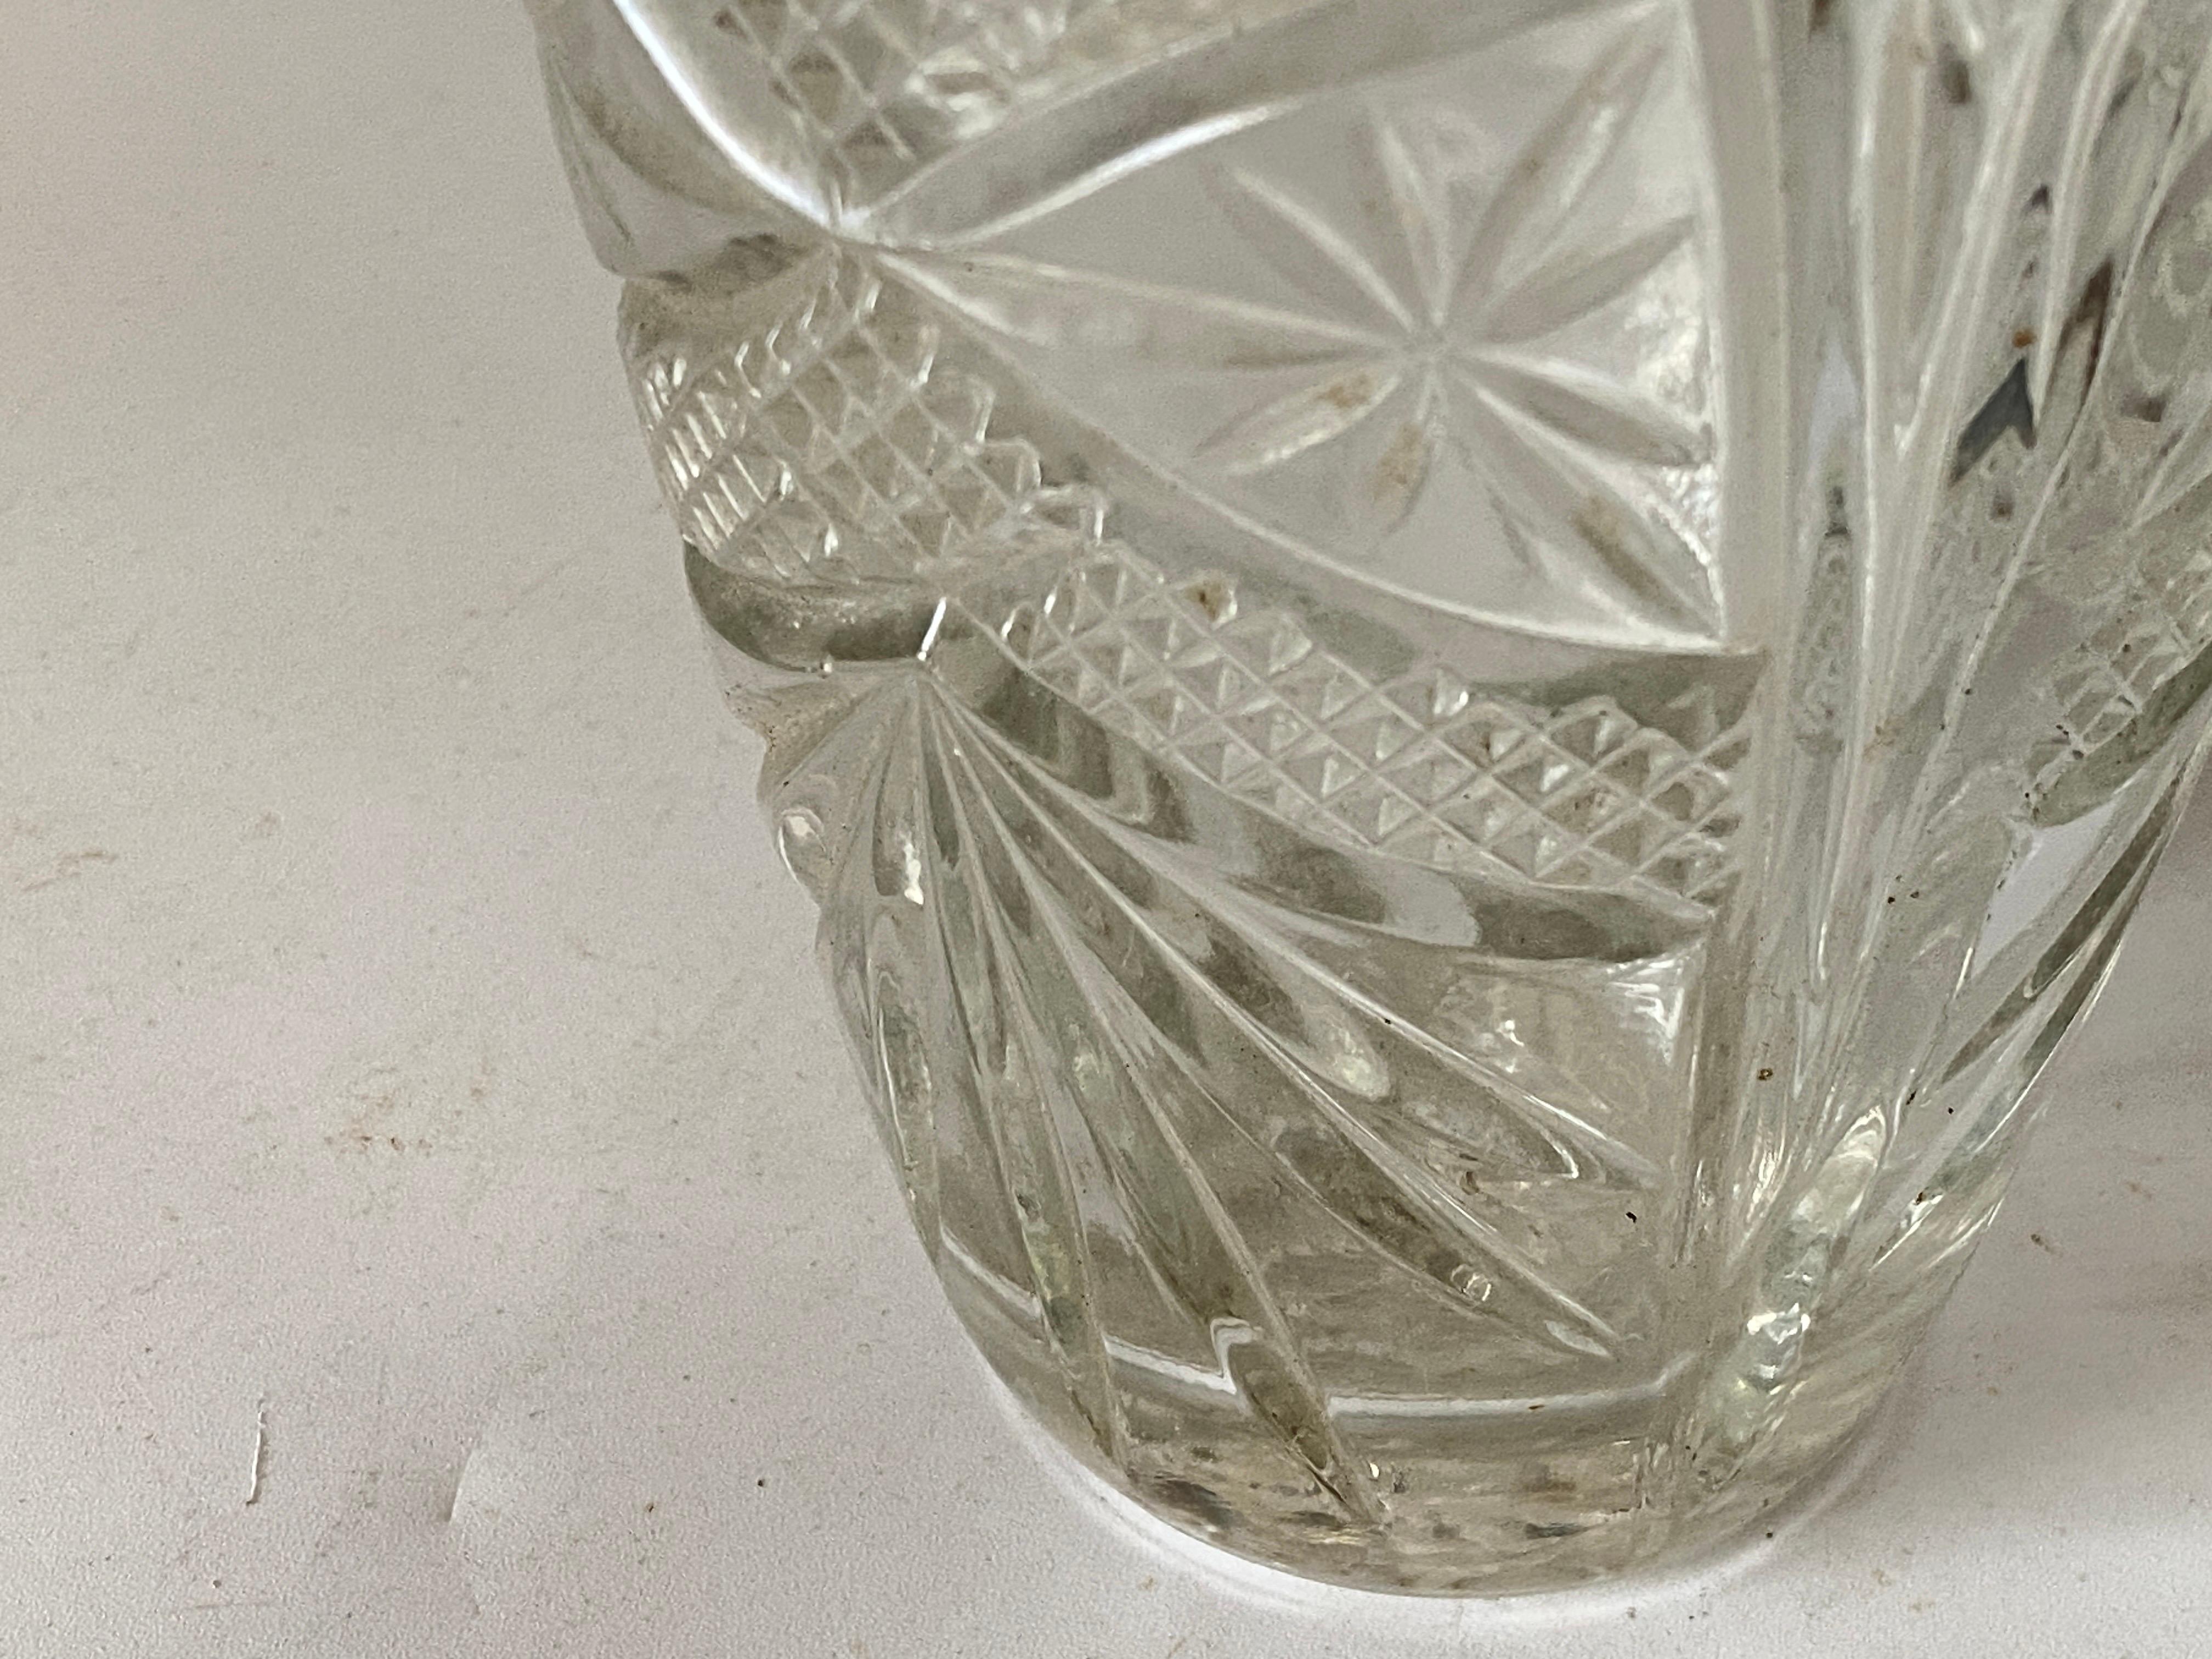 French Art Deco glass vase with Art Deco patterns, from circa 1940.
Can be used as a champain cooler too.